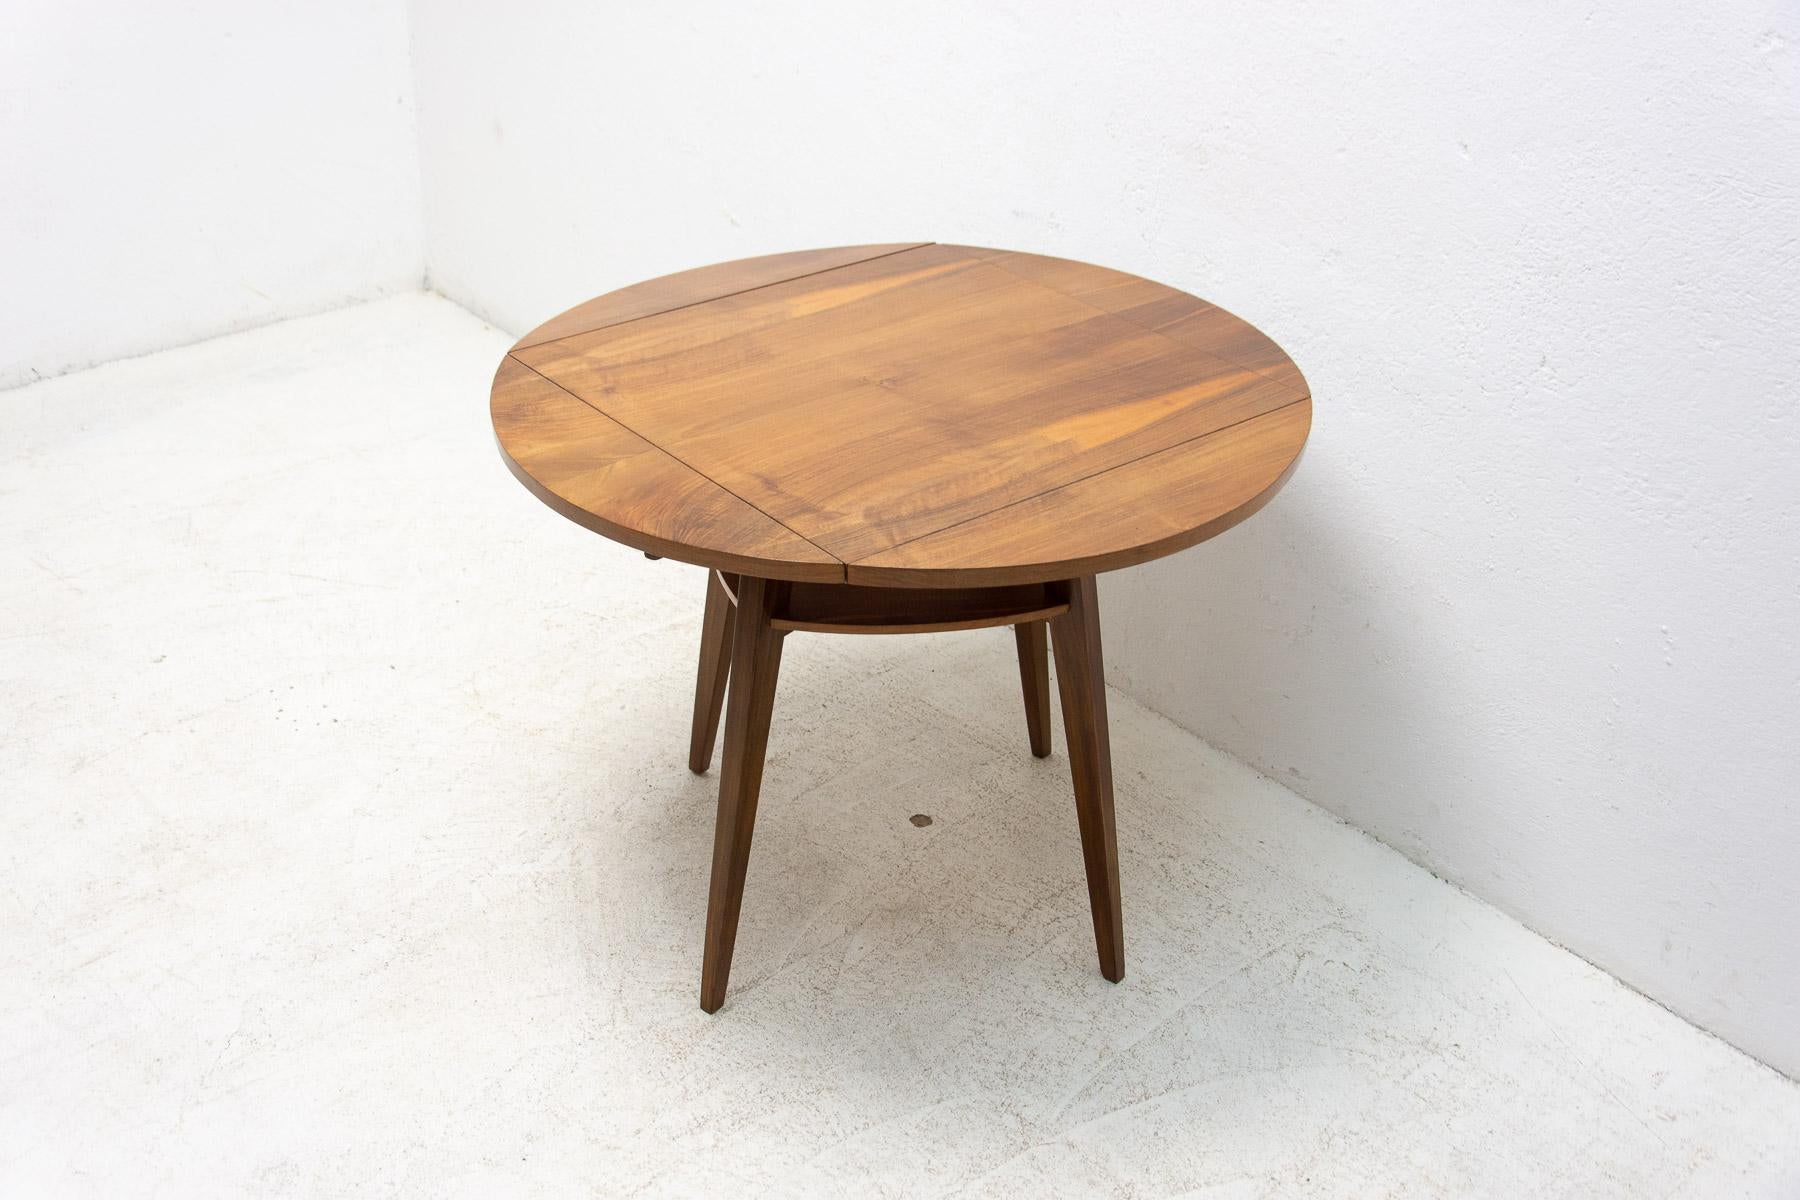 20th Century Folding Walnut Coffee Table from the 1950s, Czechoslovakia For Sale